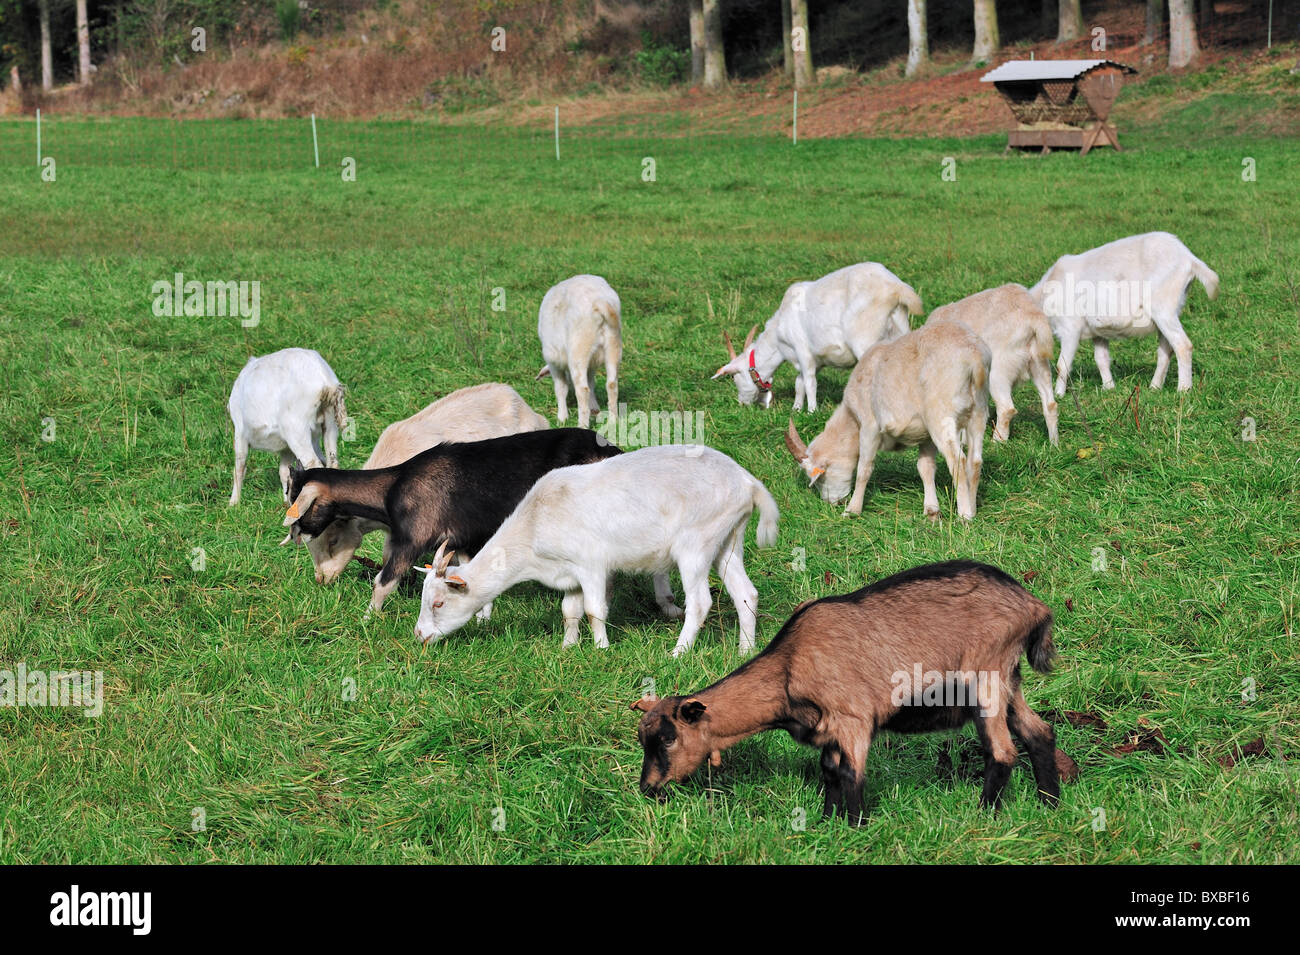 Saanen goats (Capra hircus), a white or cream-colored breed of goat, named for the Saanen valley in Switzerland Stock Photo